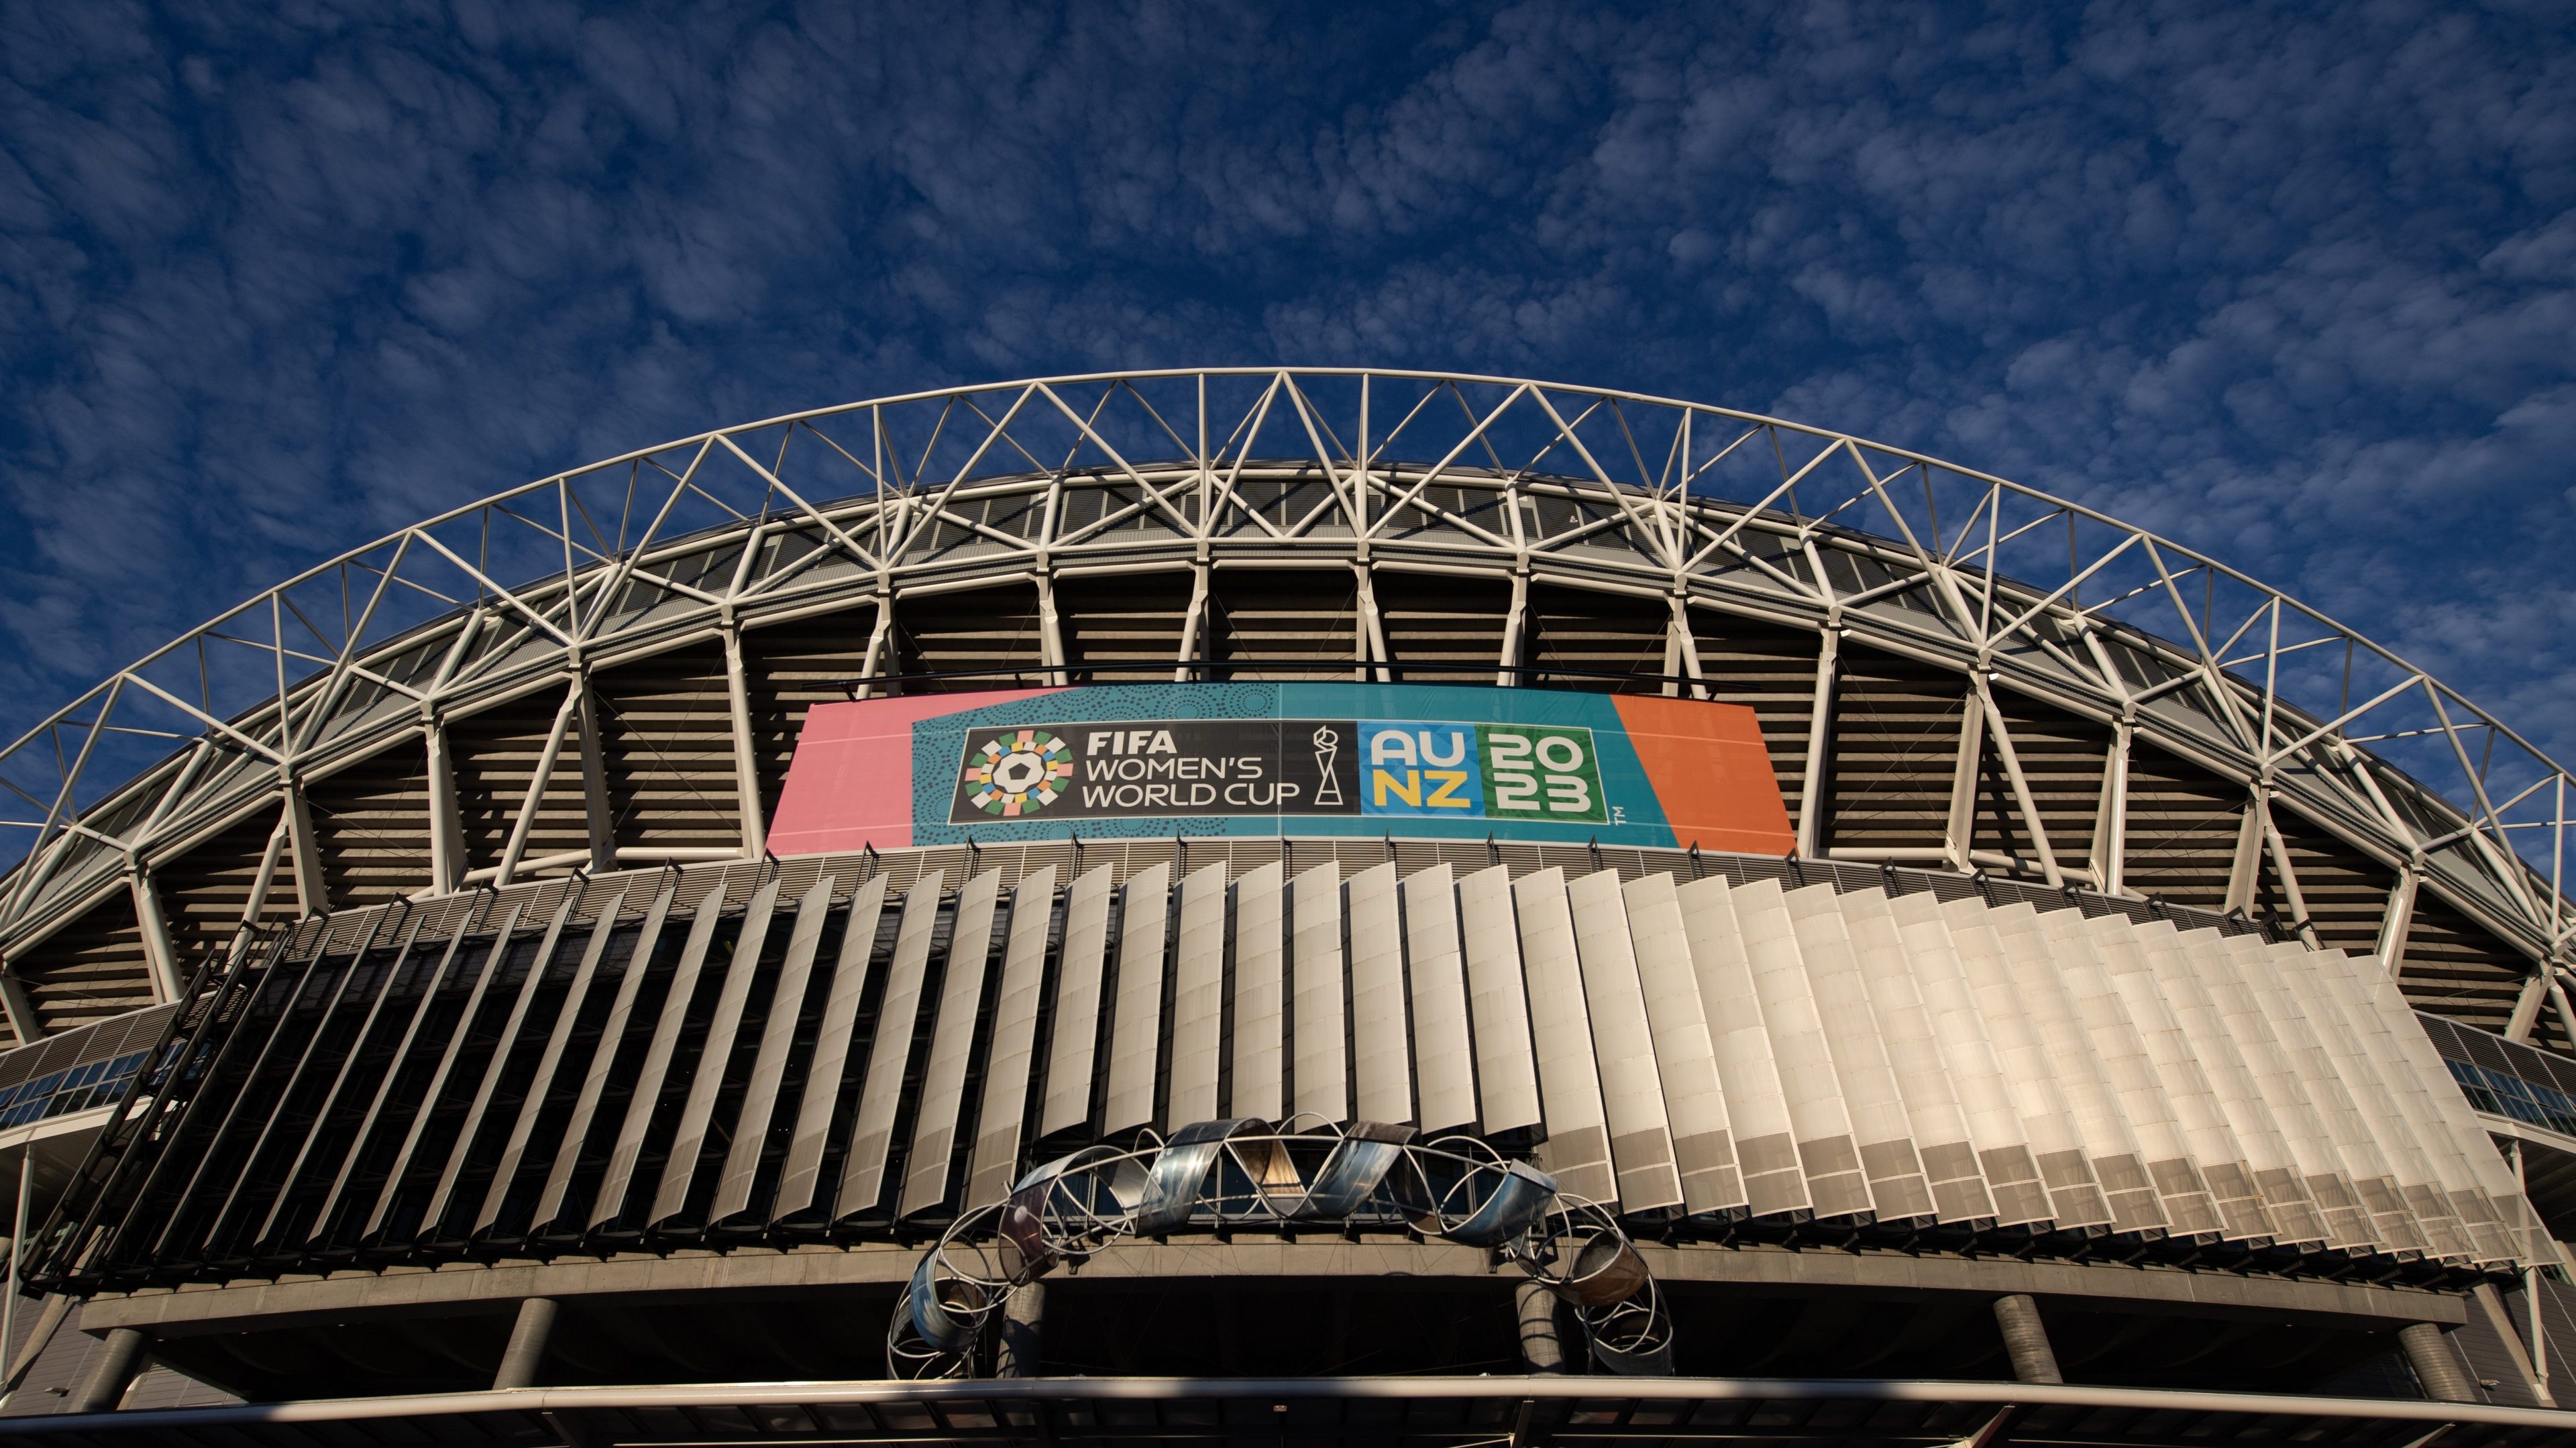 A general view of the outside of Stadium Australia with the official FIFA Women's World Cup logo ahead of the FIFA Women's World Cup Australia & New Zealand 2023 Group B match between Australia and Ireland at Stadium Australia on July 20, 2023 in Sydney, Australia.